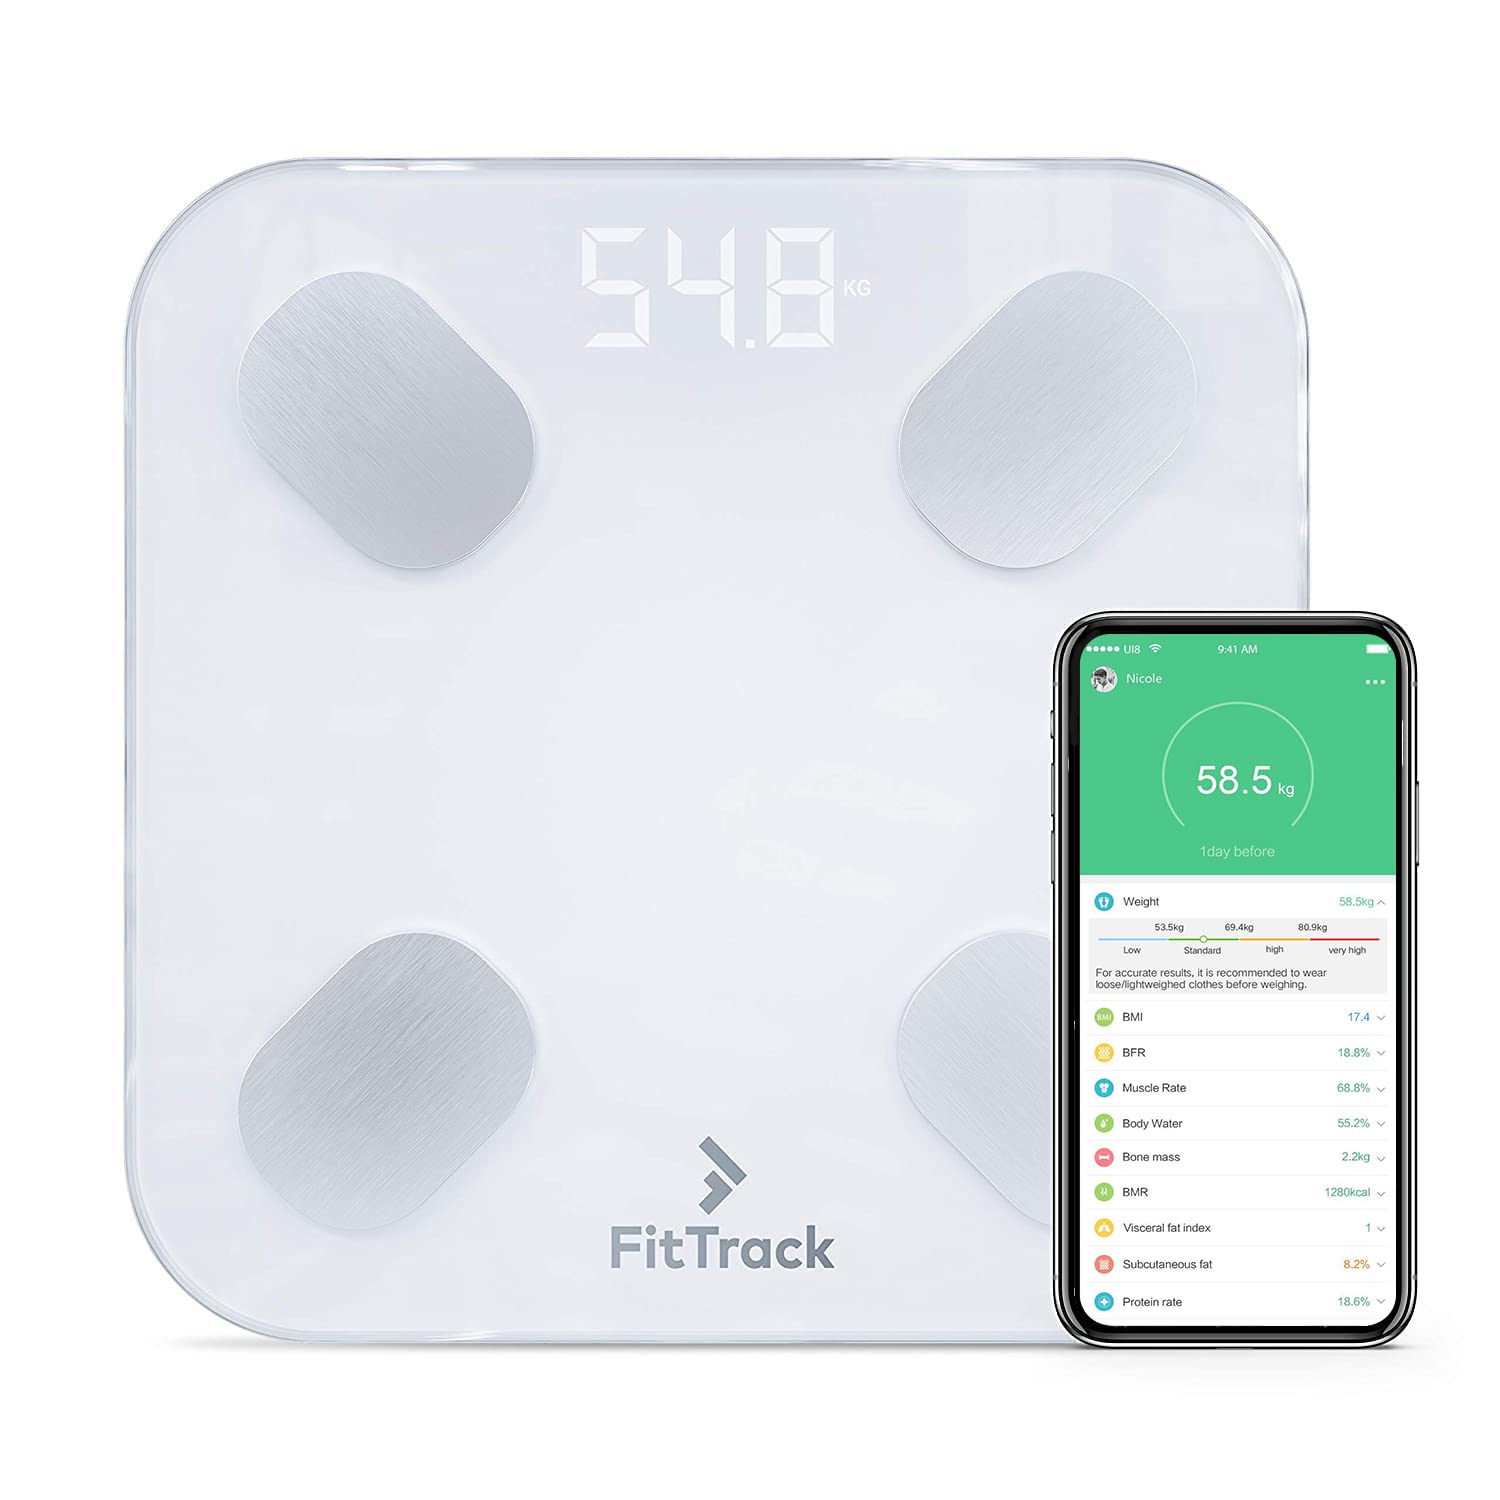 https://www.dontwasteyourmoney.com/wp-content/uploads/2022/11/fittrack-personalized-glass-bmi-scale.jpg